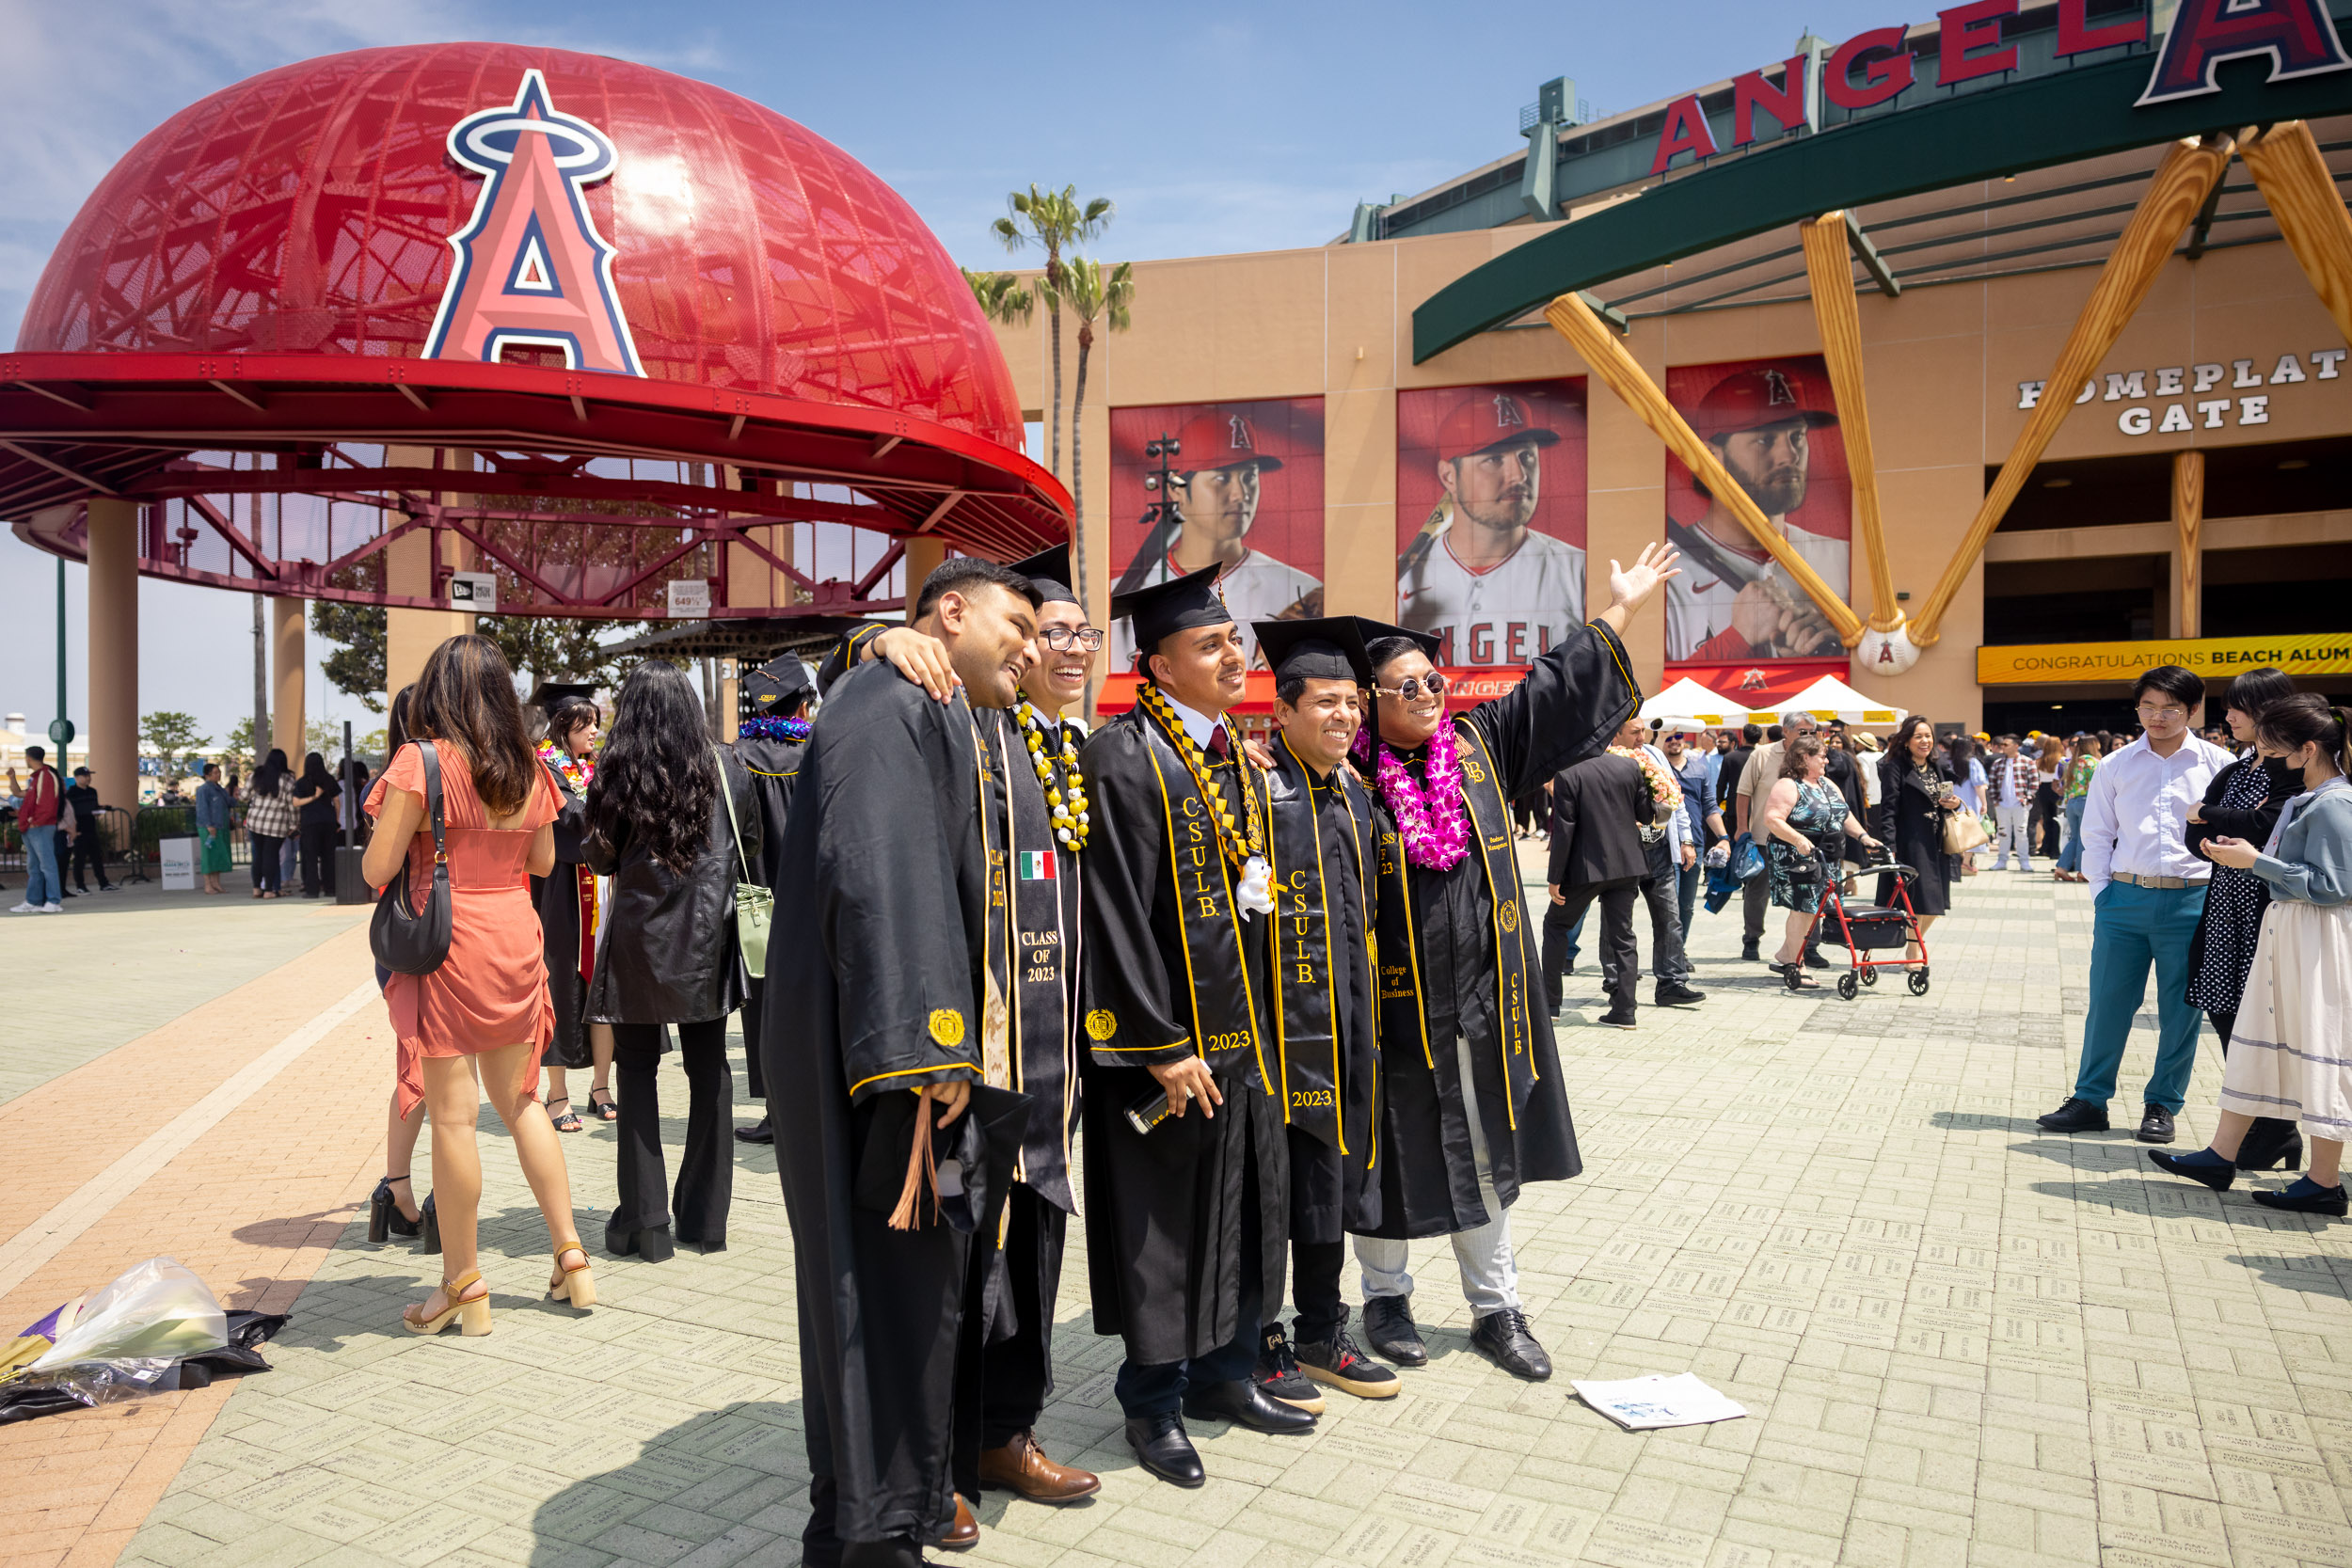 Family stands in front of big red Angels cap